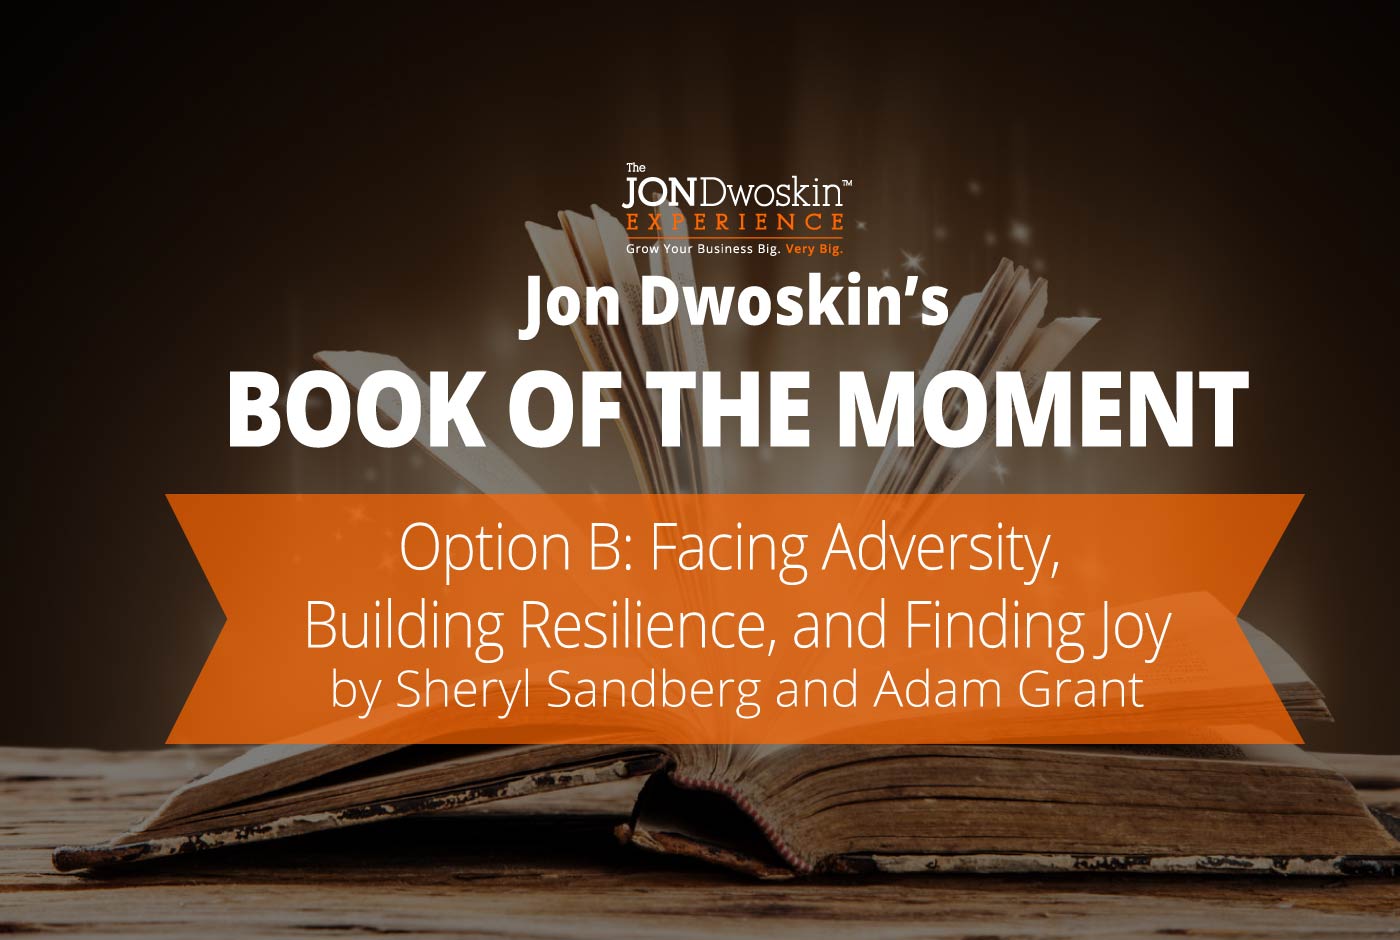 Jon Dwoskin's Book of the Moment: Option B: Facing Adversity, Building Resilience, and Finding Joy